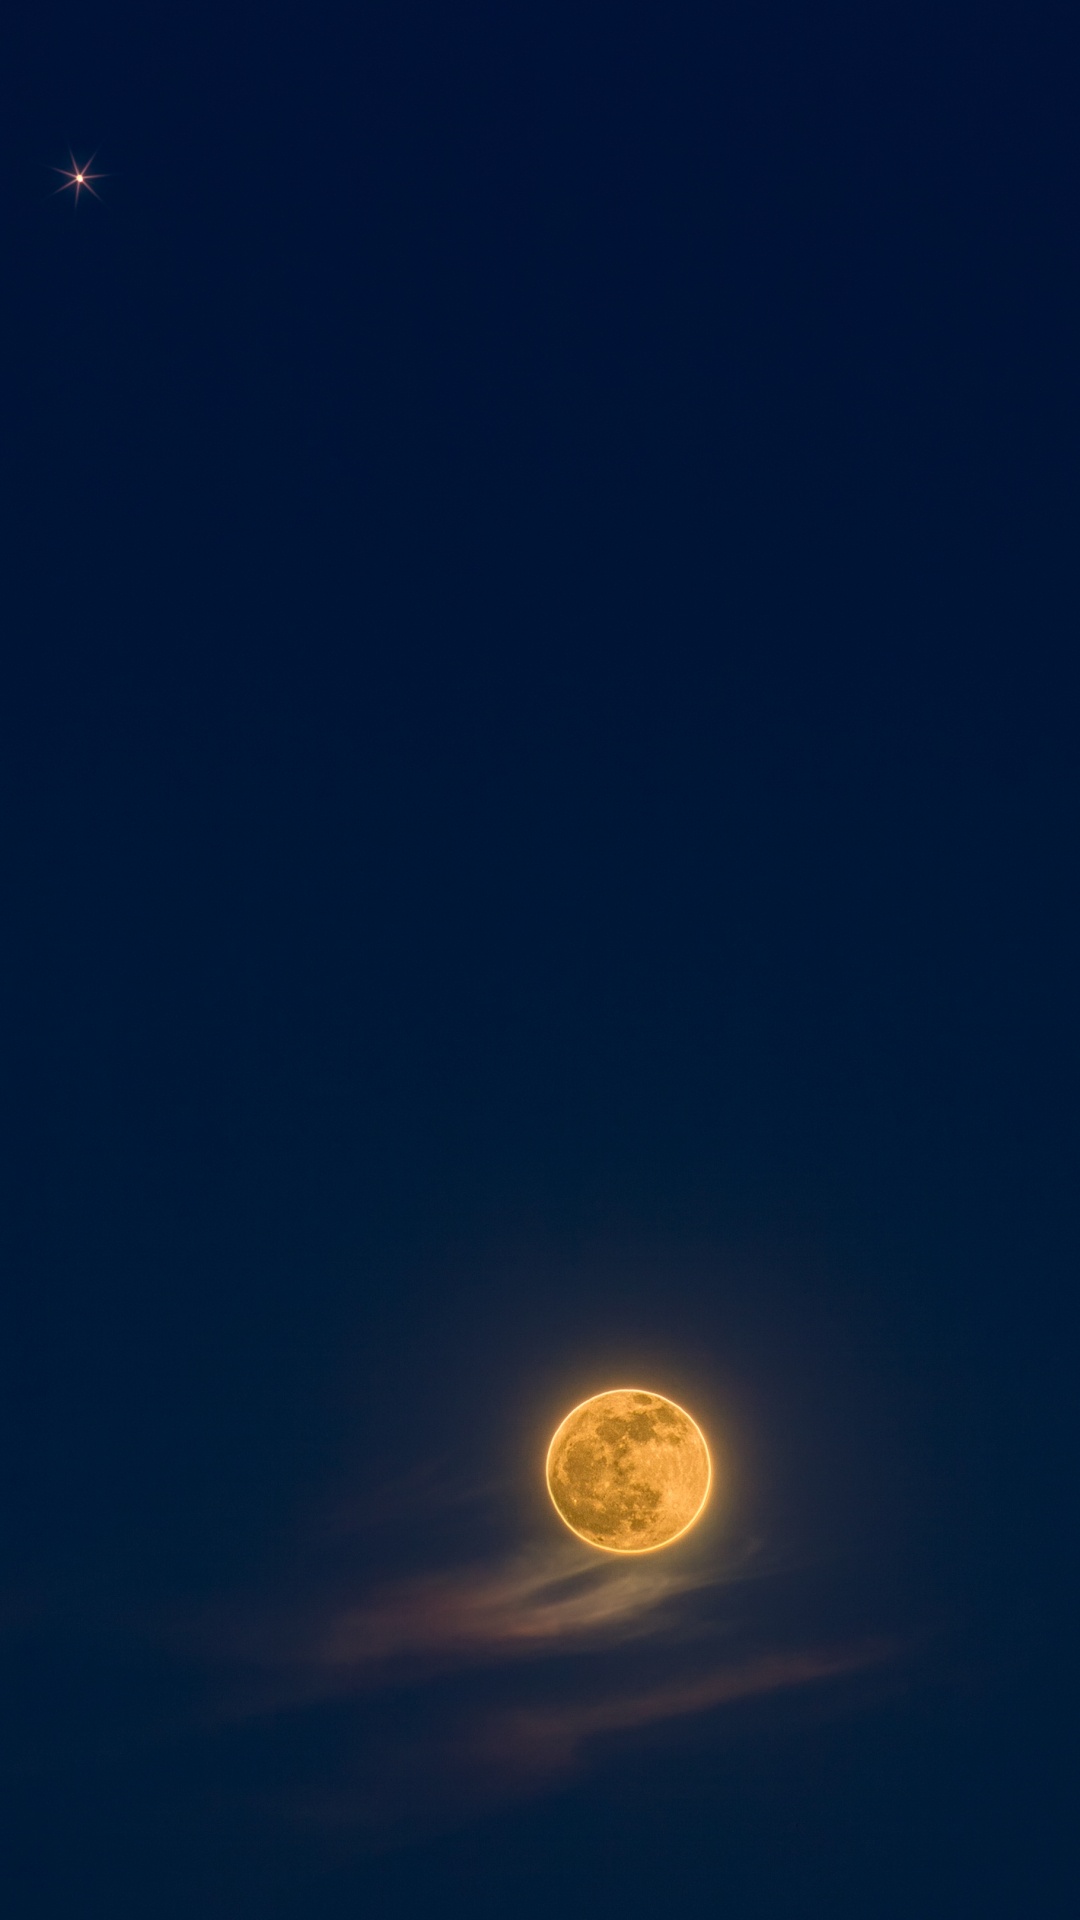 Full Moon in The Sky. Wallpaper in 1080x1920 Resolution